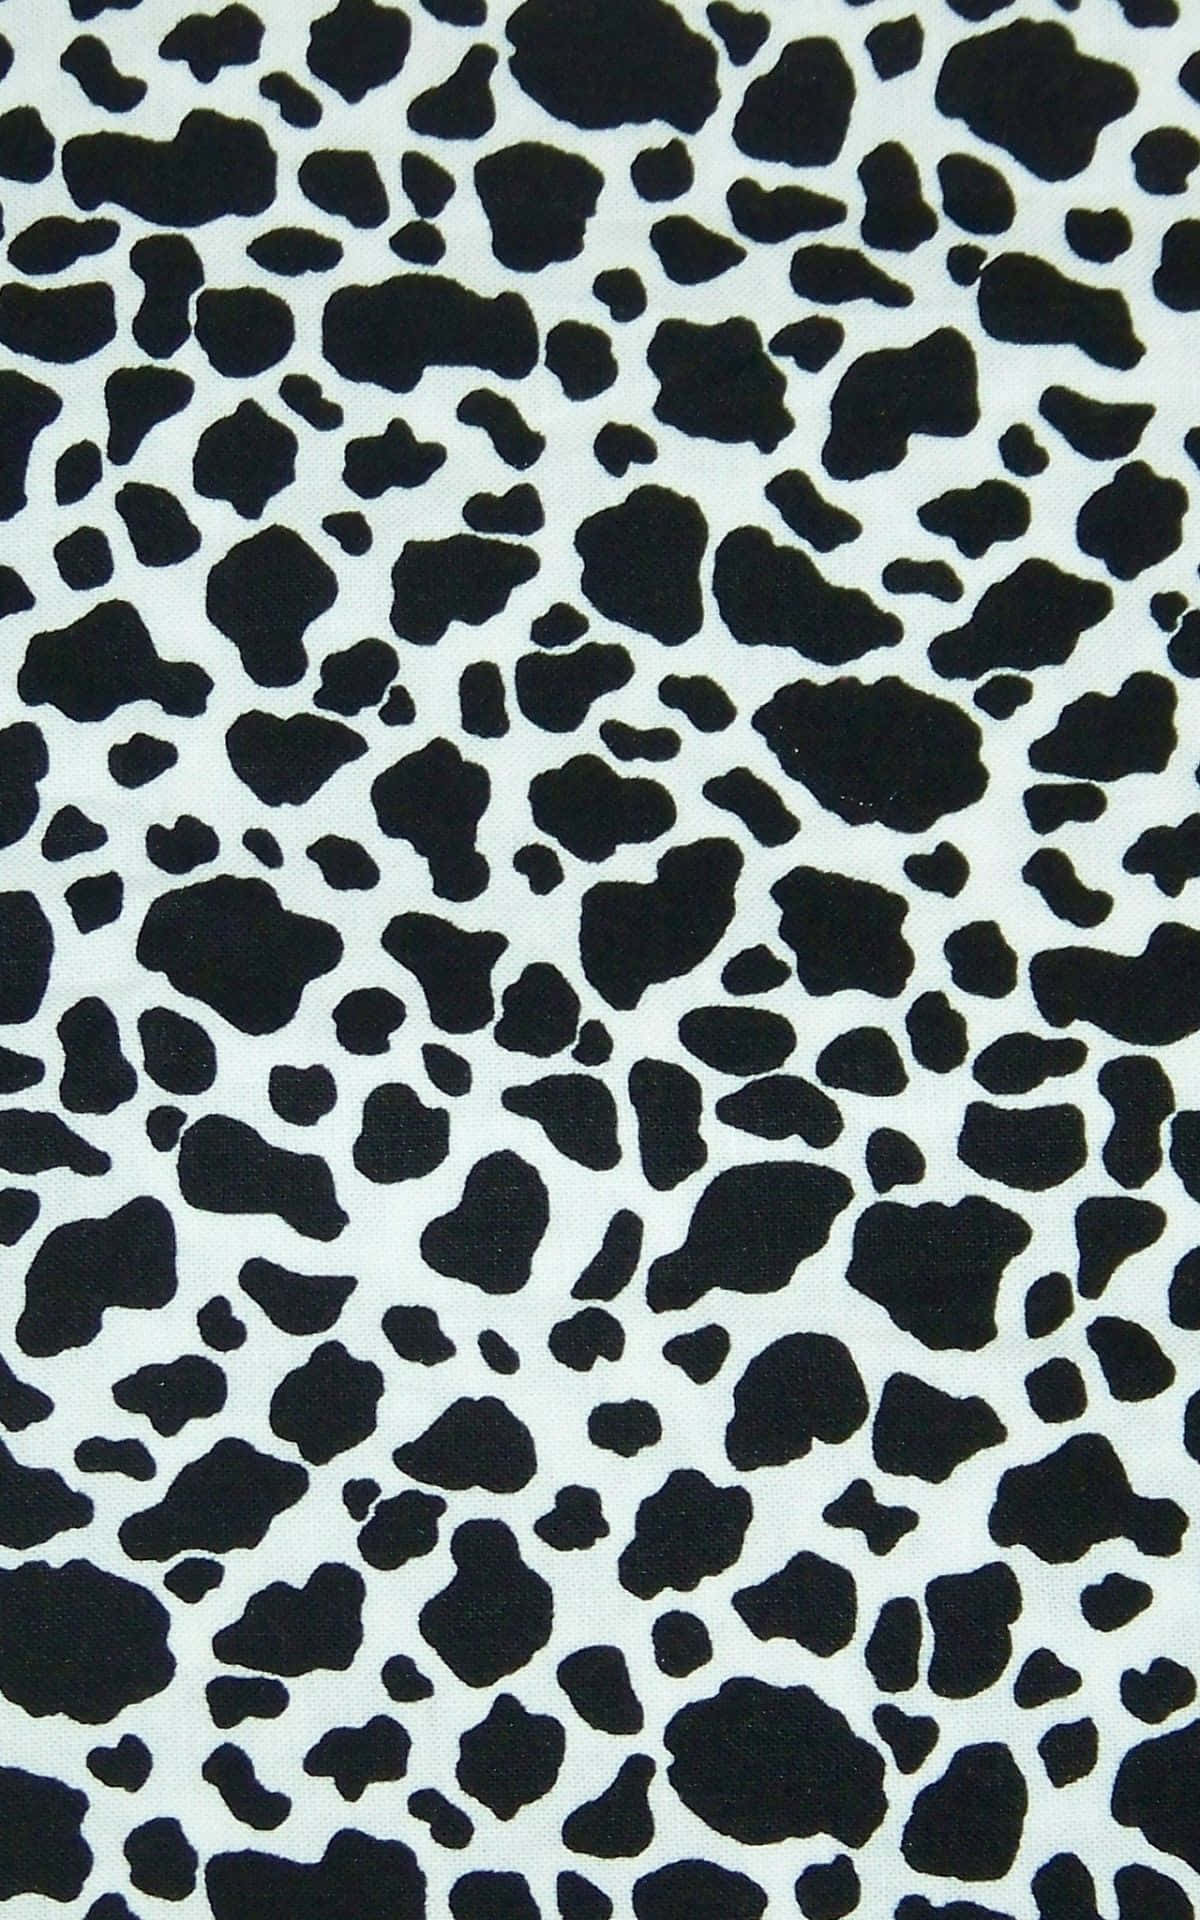 A Black And White Cow Print Fabric